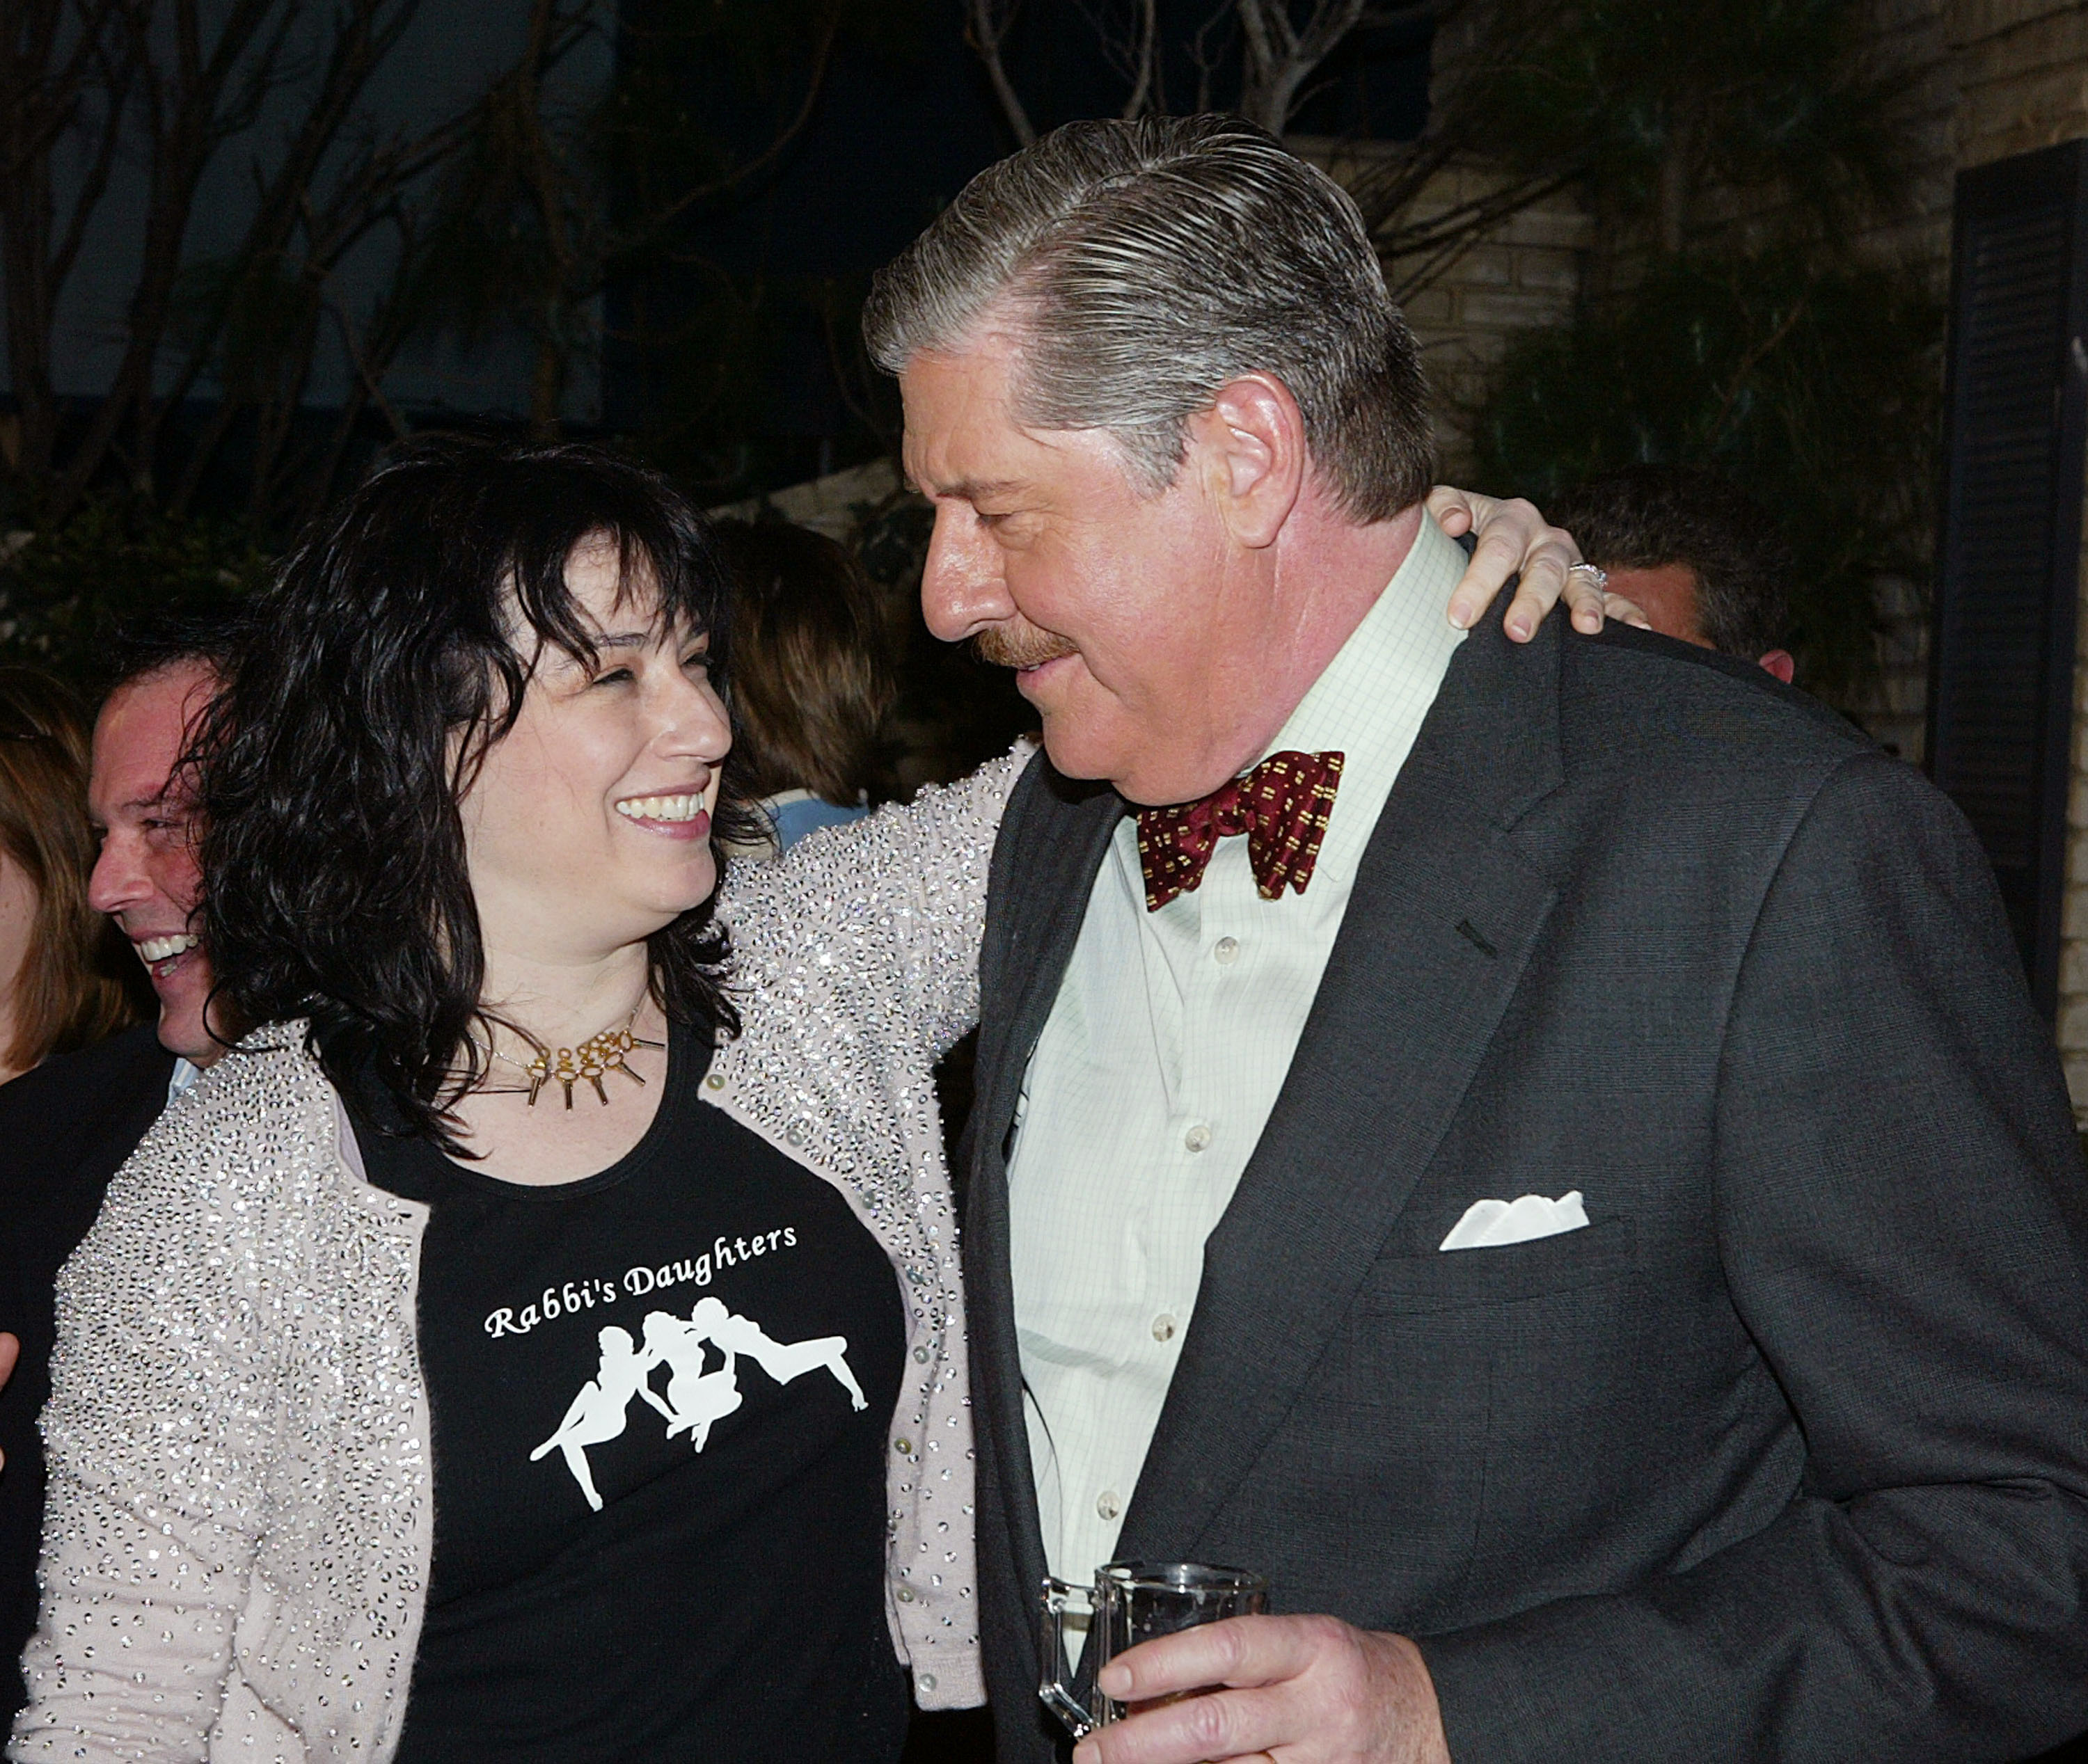 'Gilmore Girls' Creator Amy Sherman-Palladino and Edward Herrmann chat at the 100th episode party for their famed show